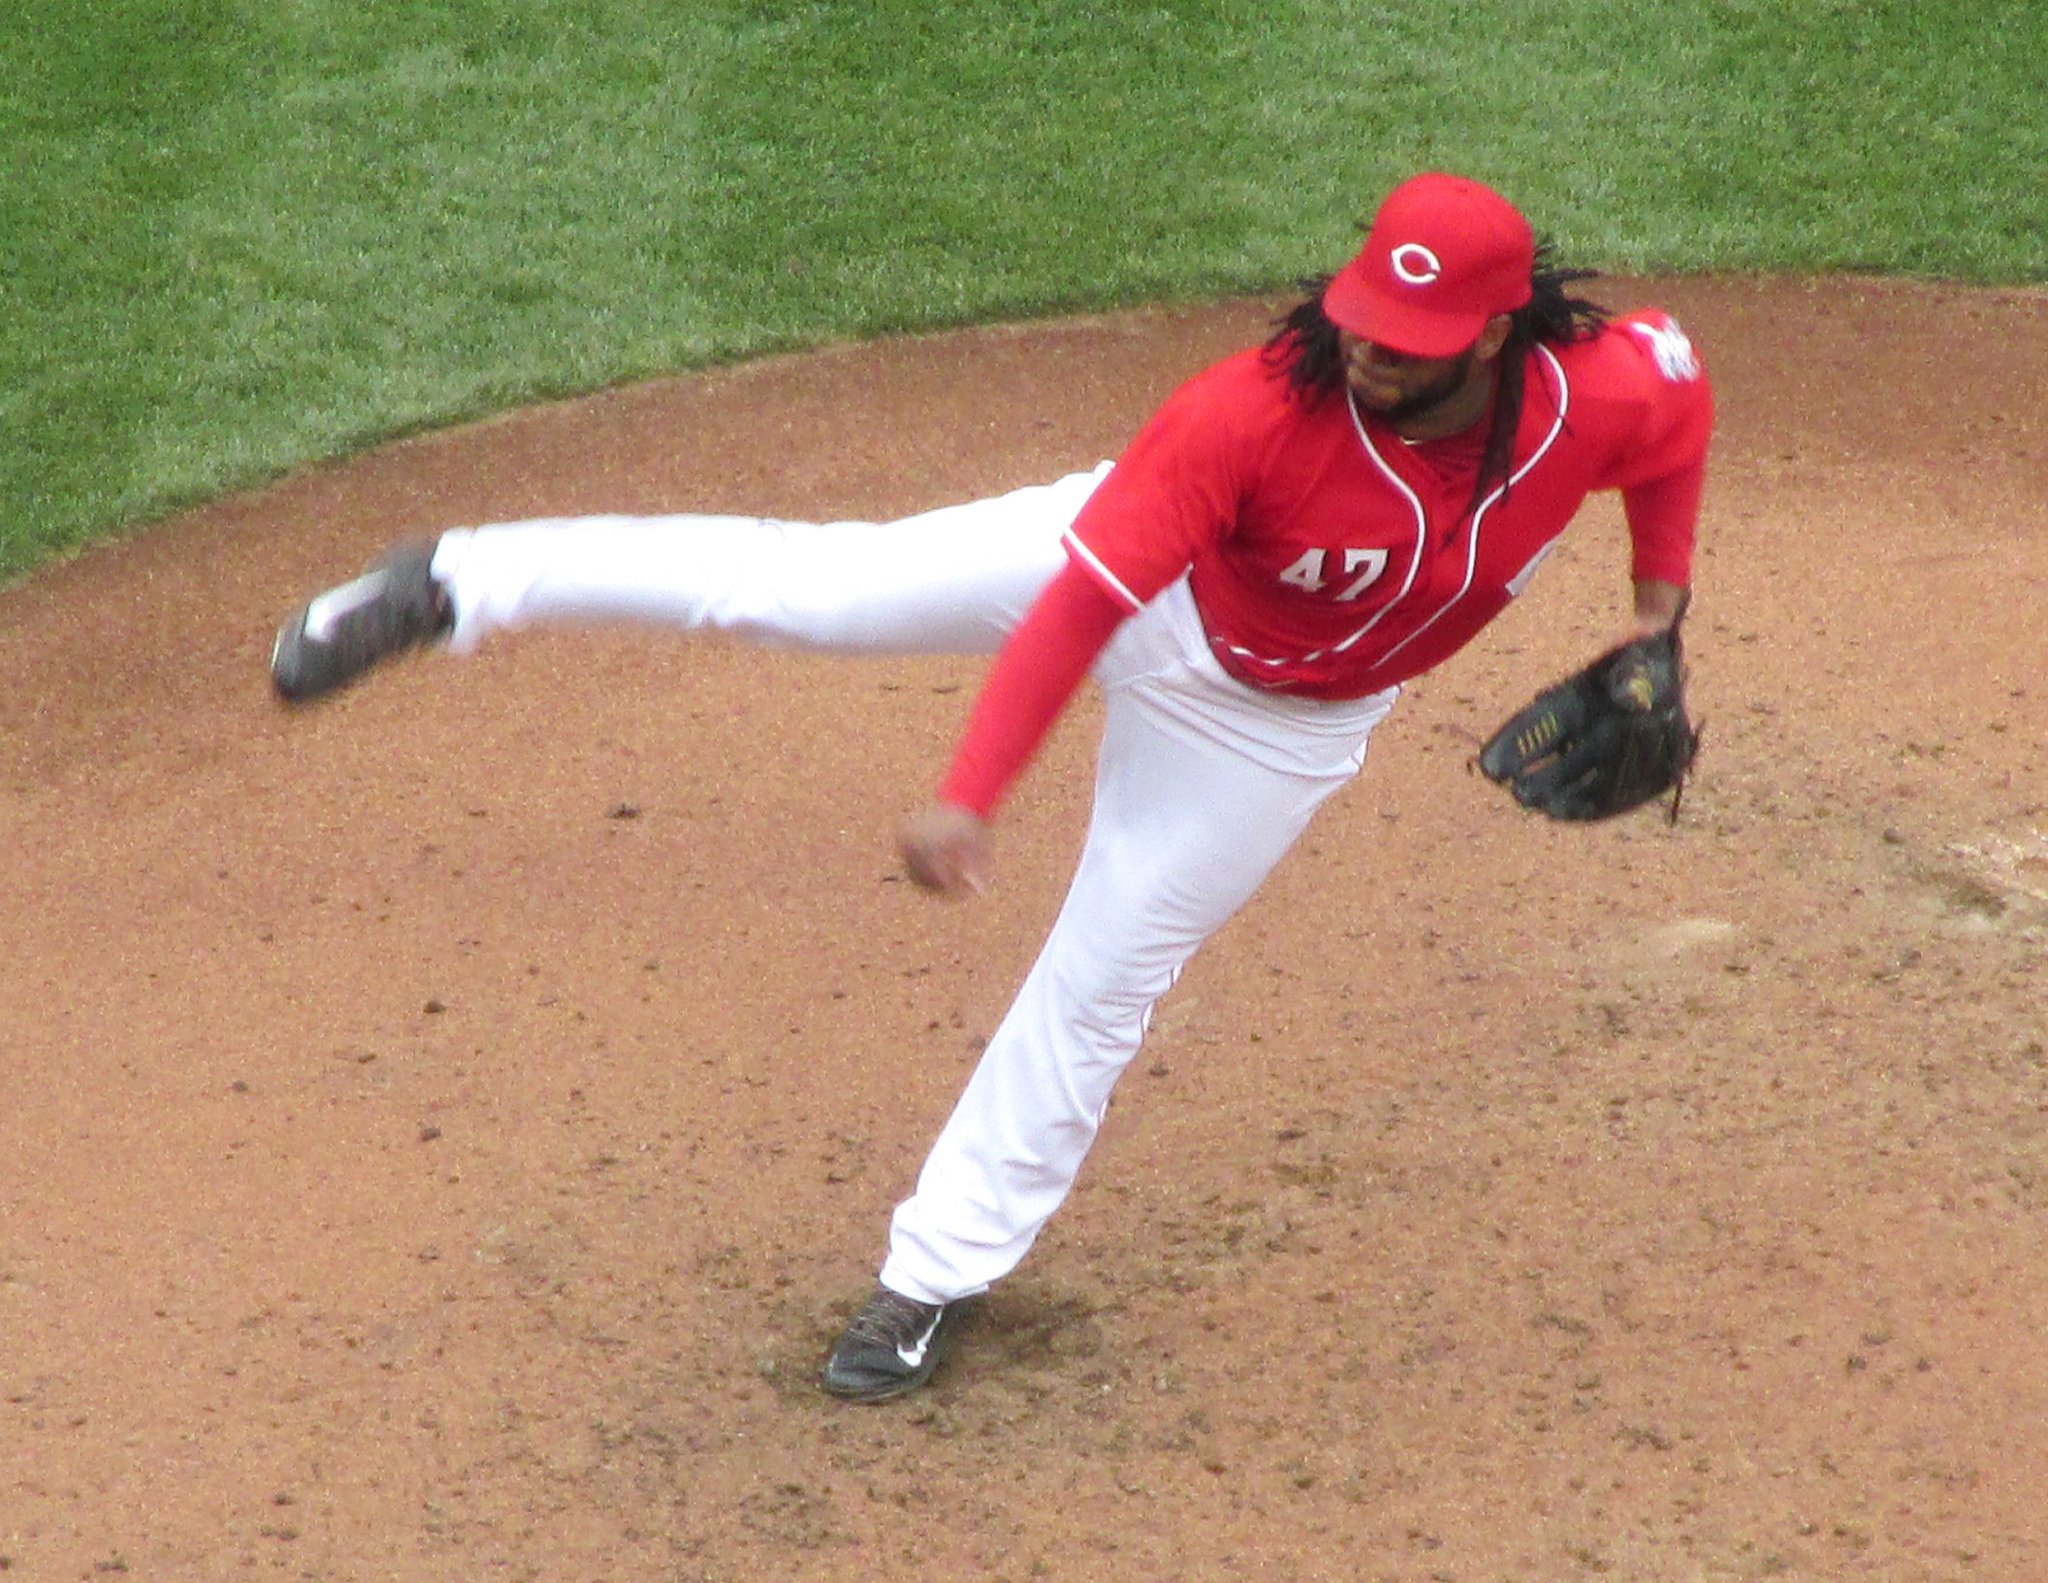 Happy Birthday Johnny Cueto, born on this date in 1986. We miss you Johnny Beisbol!  